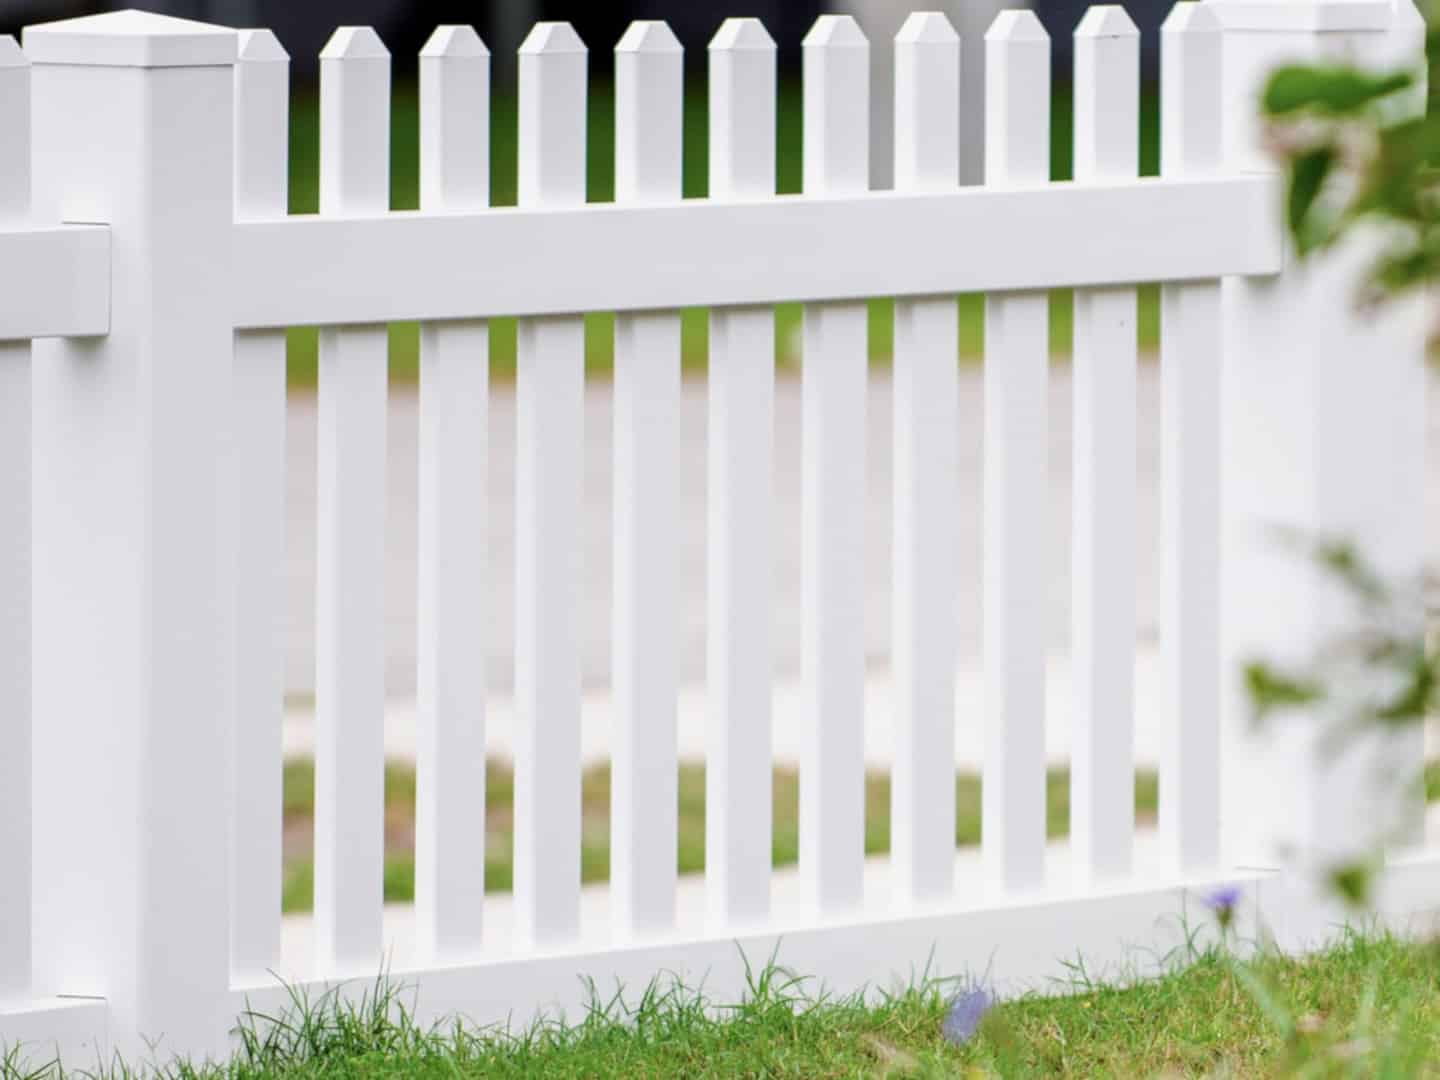 Summerville Fence Installation and Fence Company (843) 225-9051